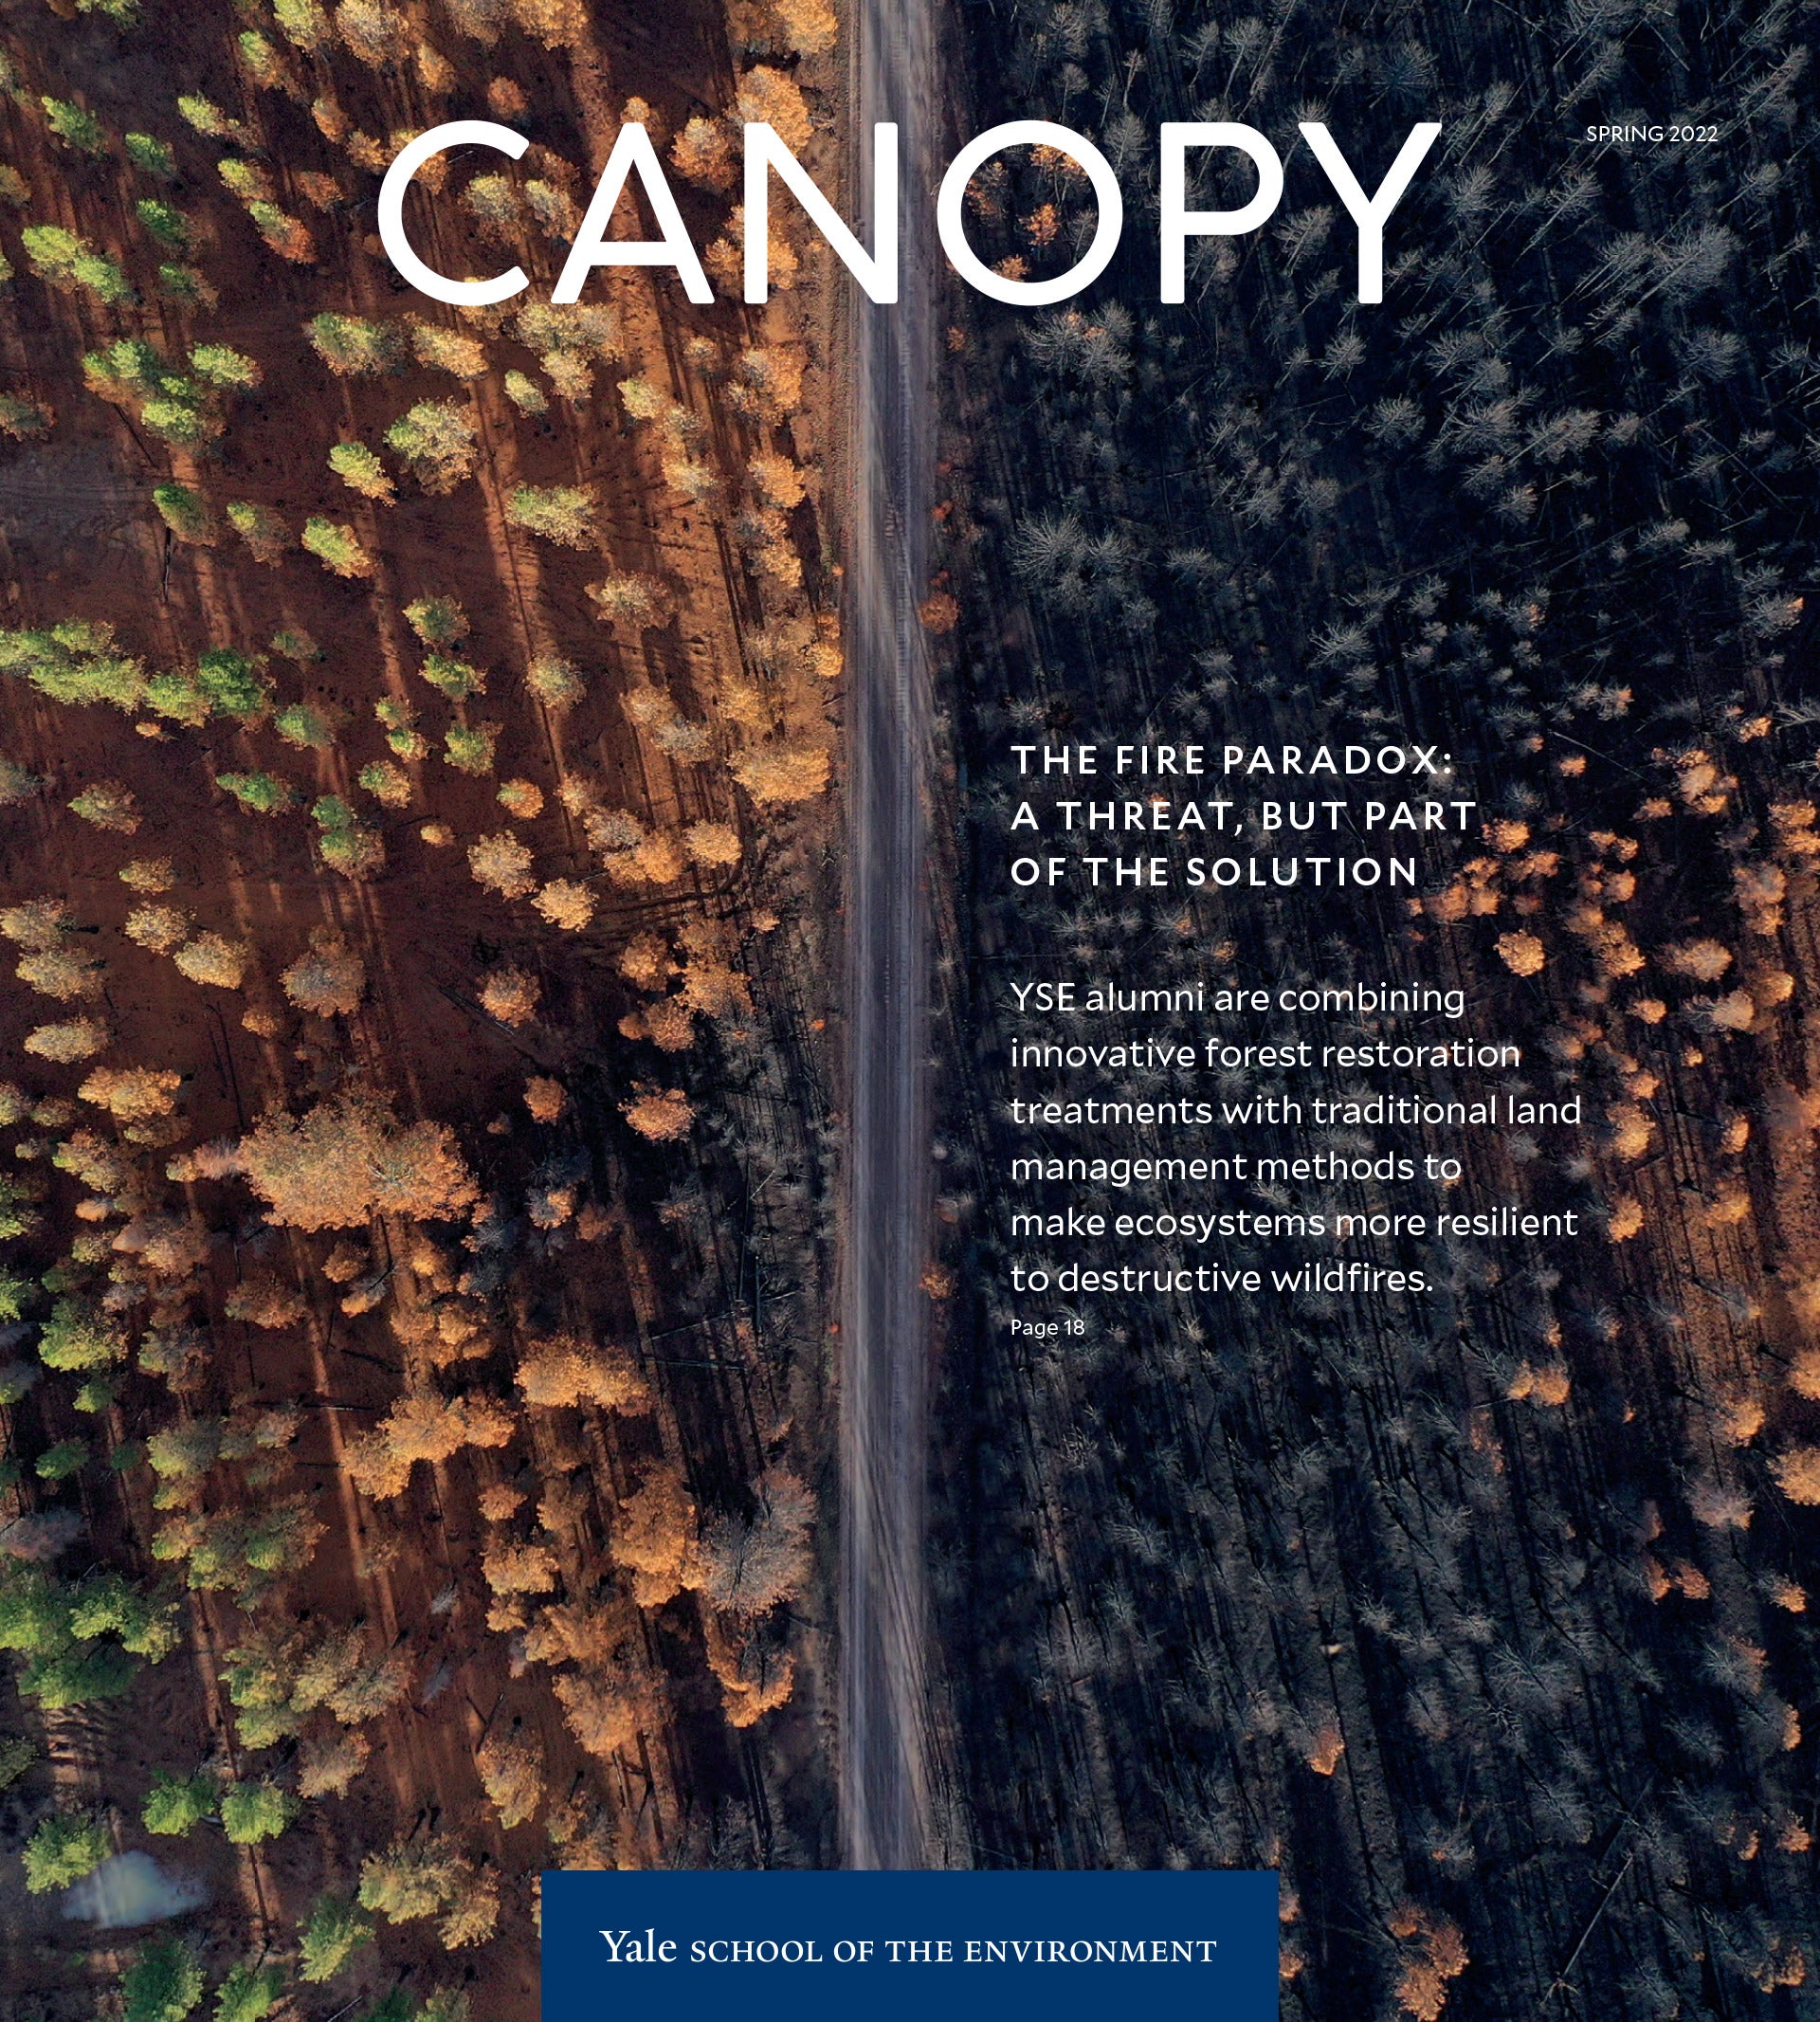 Cover of Canopy magazine